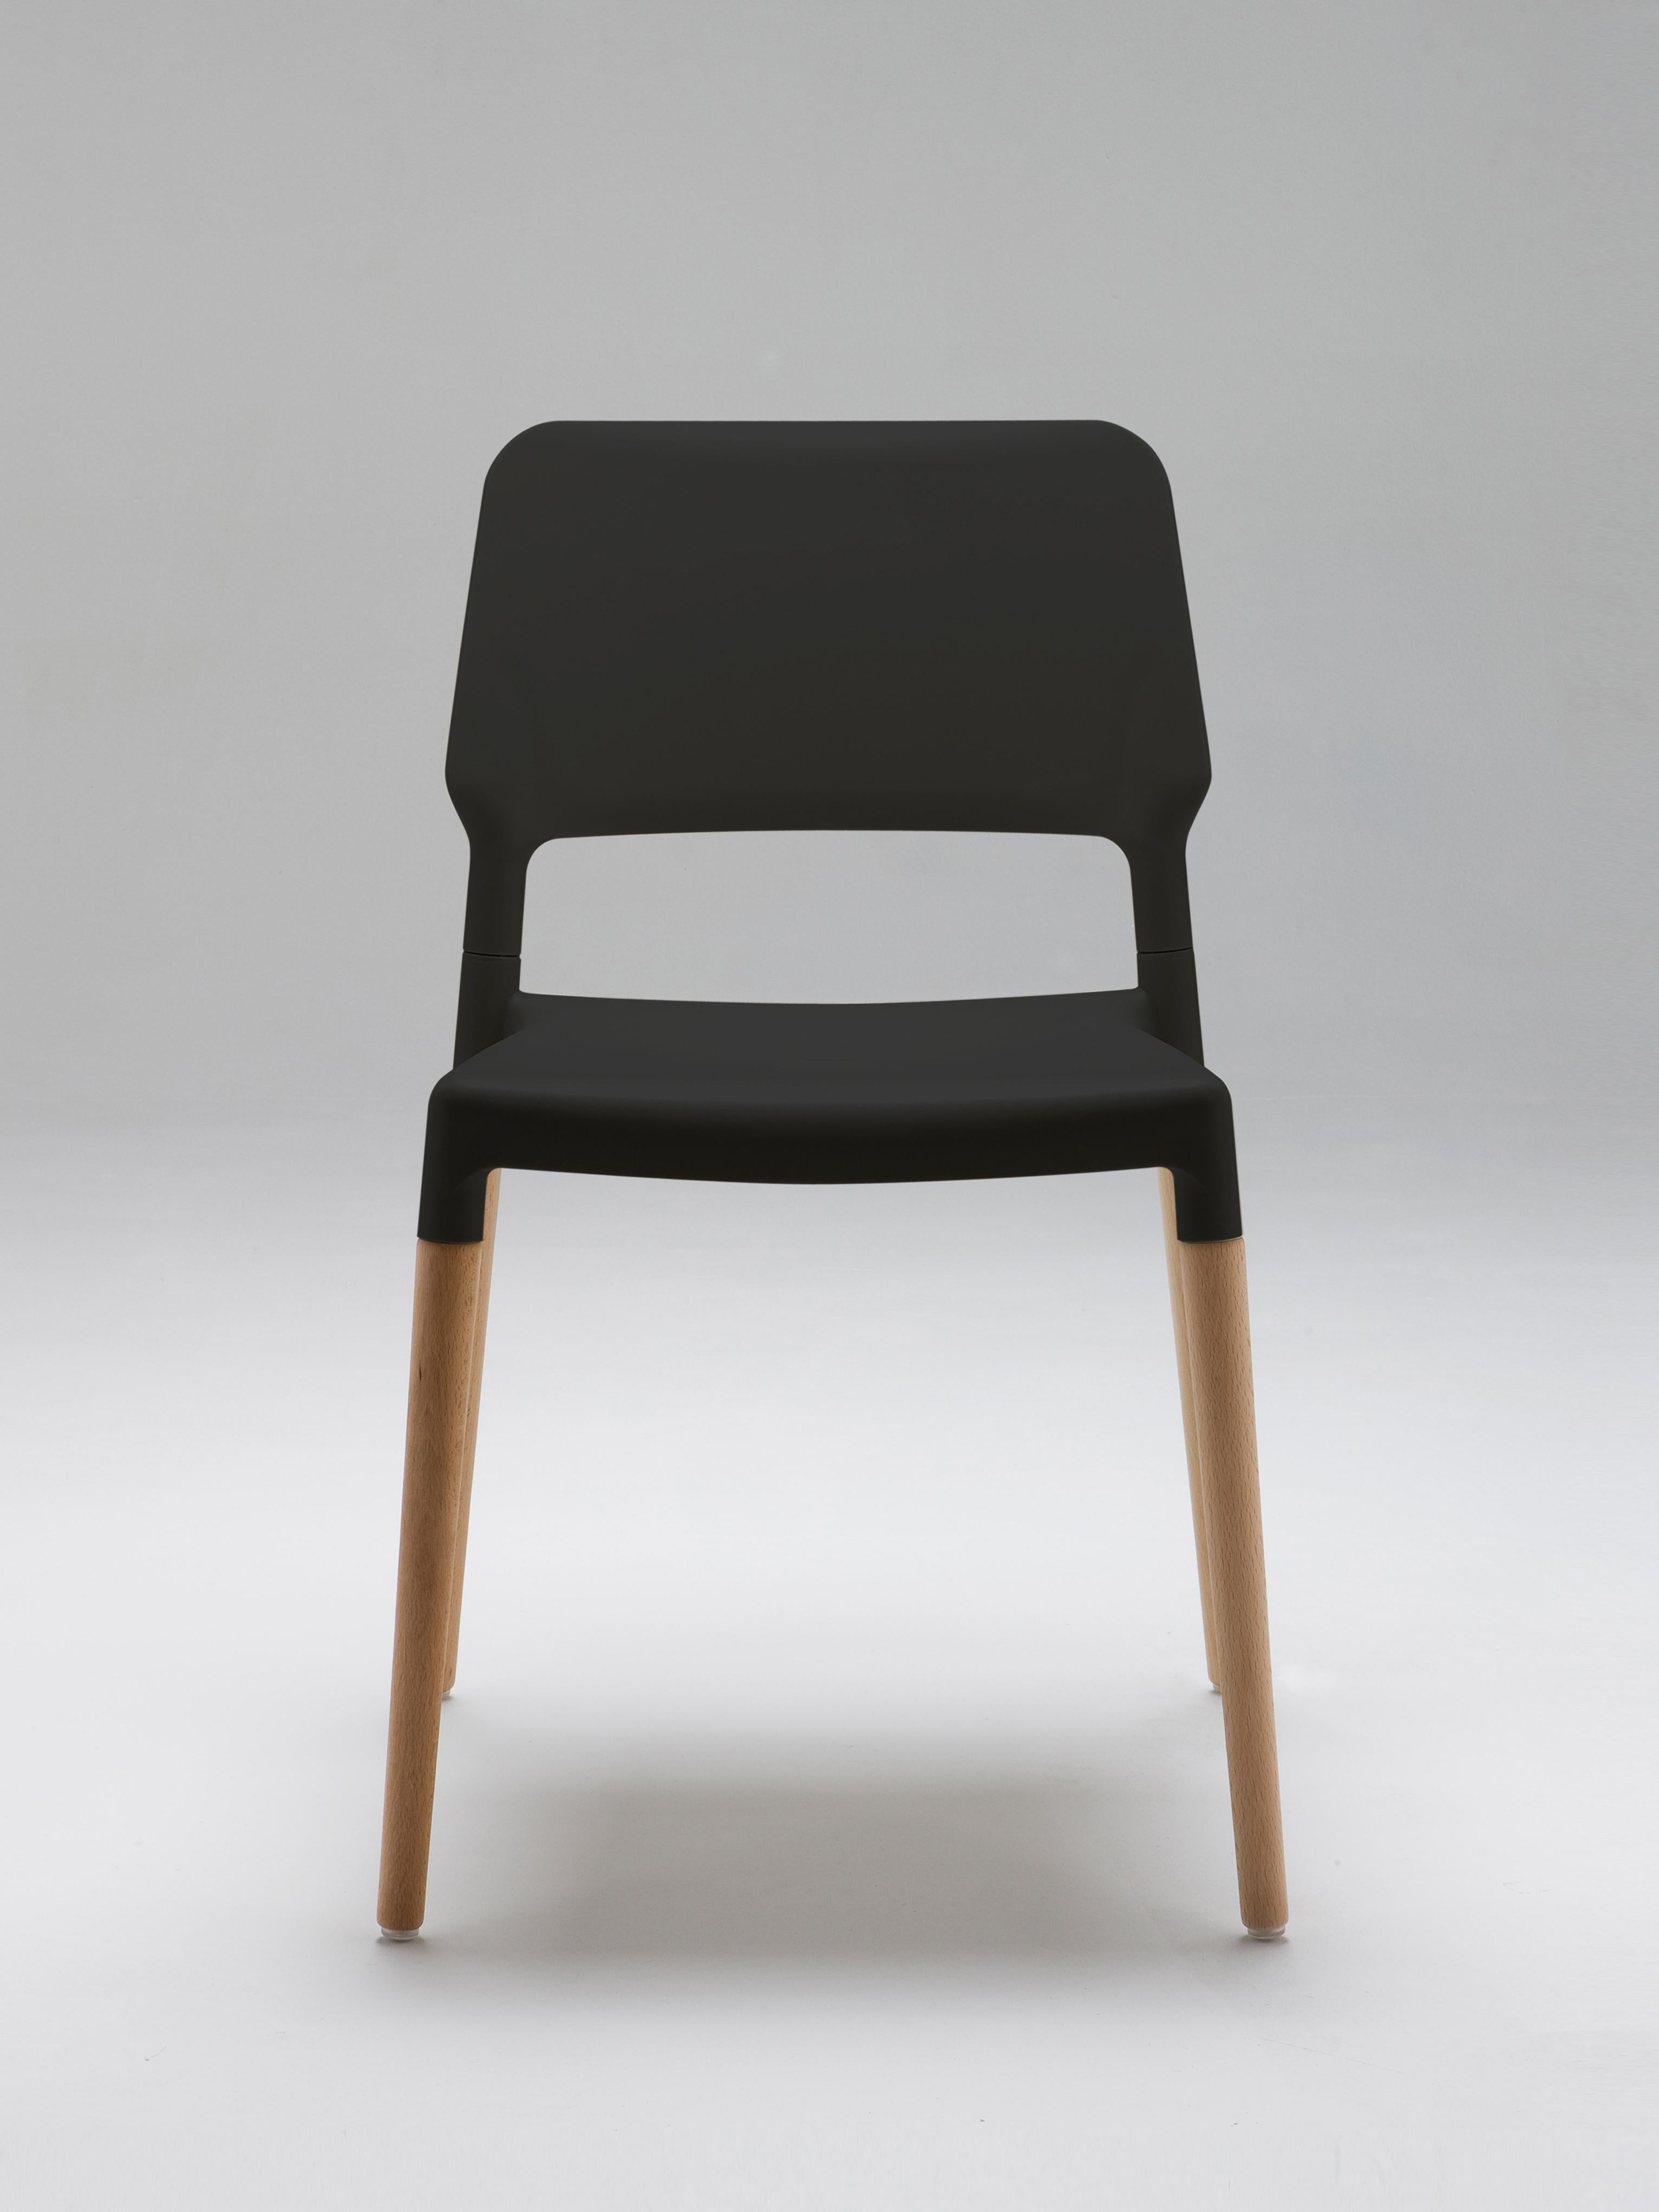 Set of 4 Belloch dining chair by Lagranja Design
Dimensions: D 50 x W 54 x H 79 cm
Materials: beech wood, polypropylene, fiberglass.
Available in other colors.

The Belloch chair is the result of commissioning a lightweight and stackable